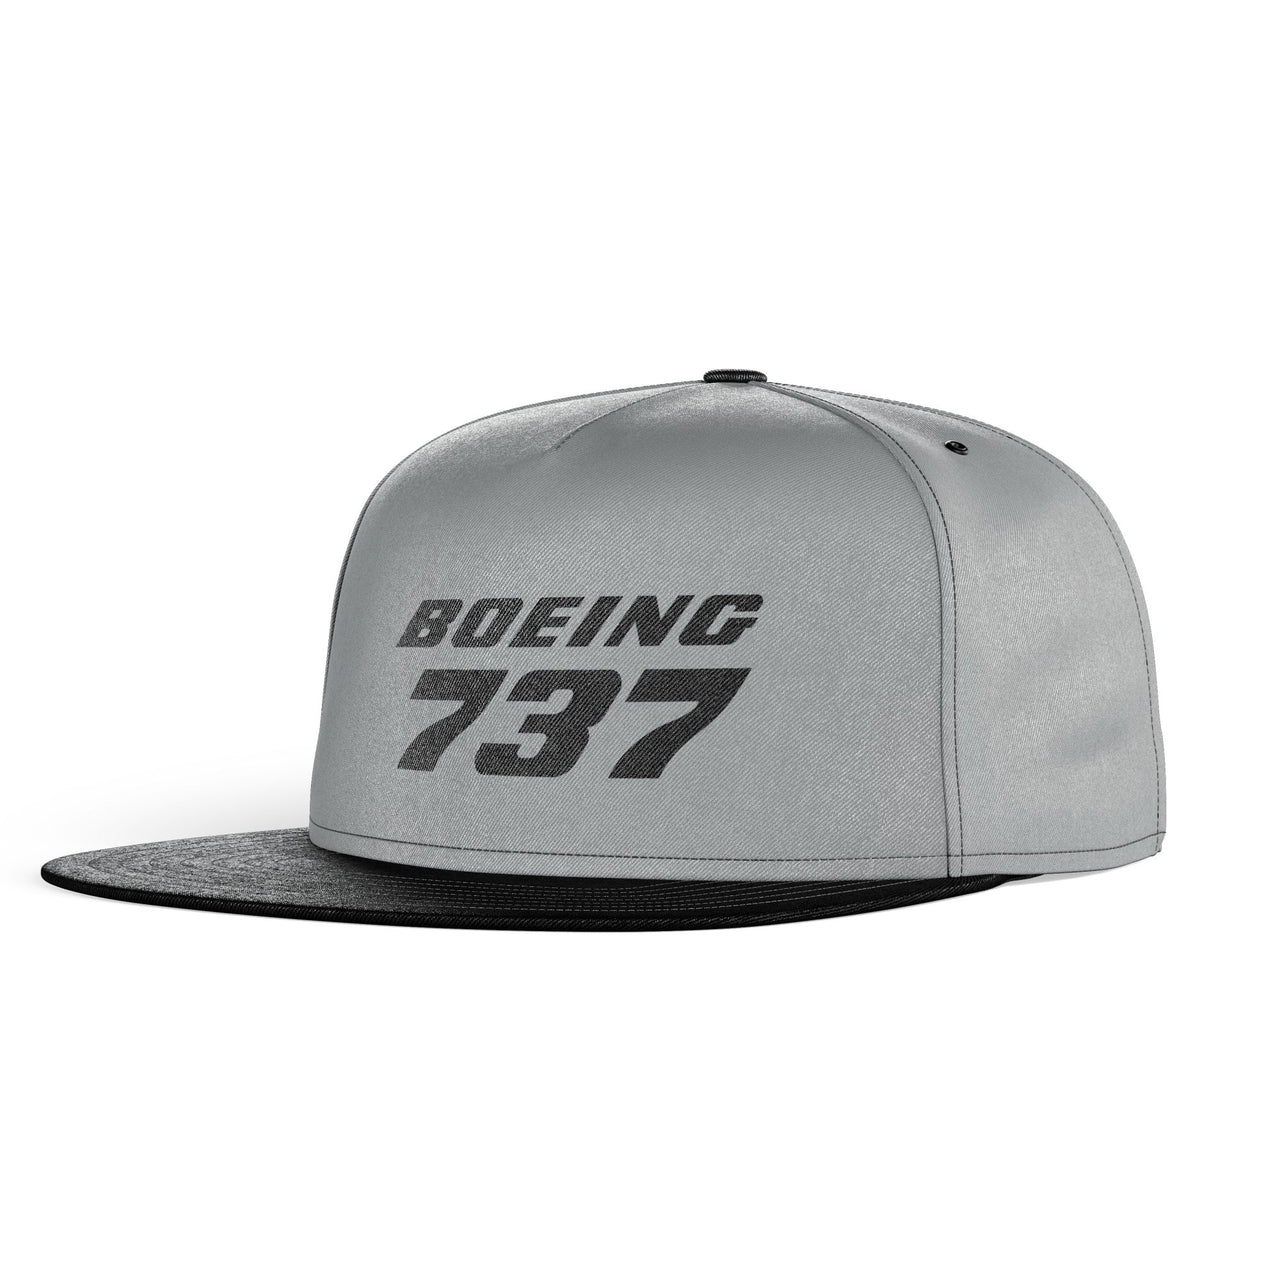 Boeing 737 & Text Designed Snapback Caps & Hats